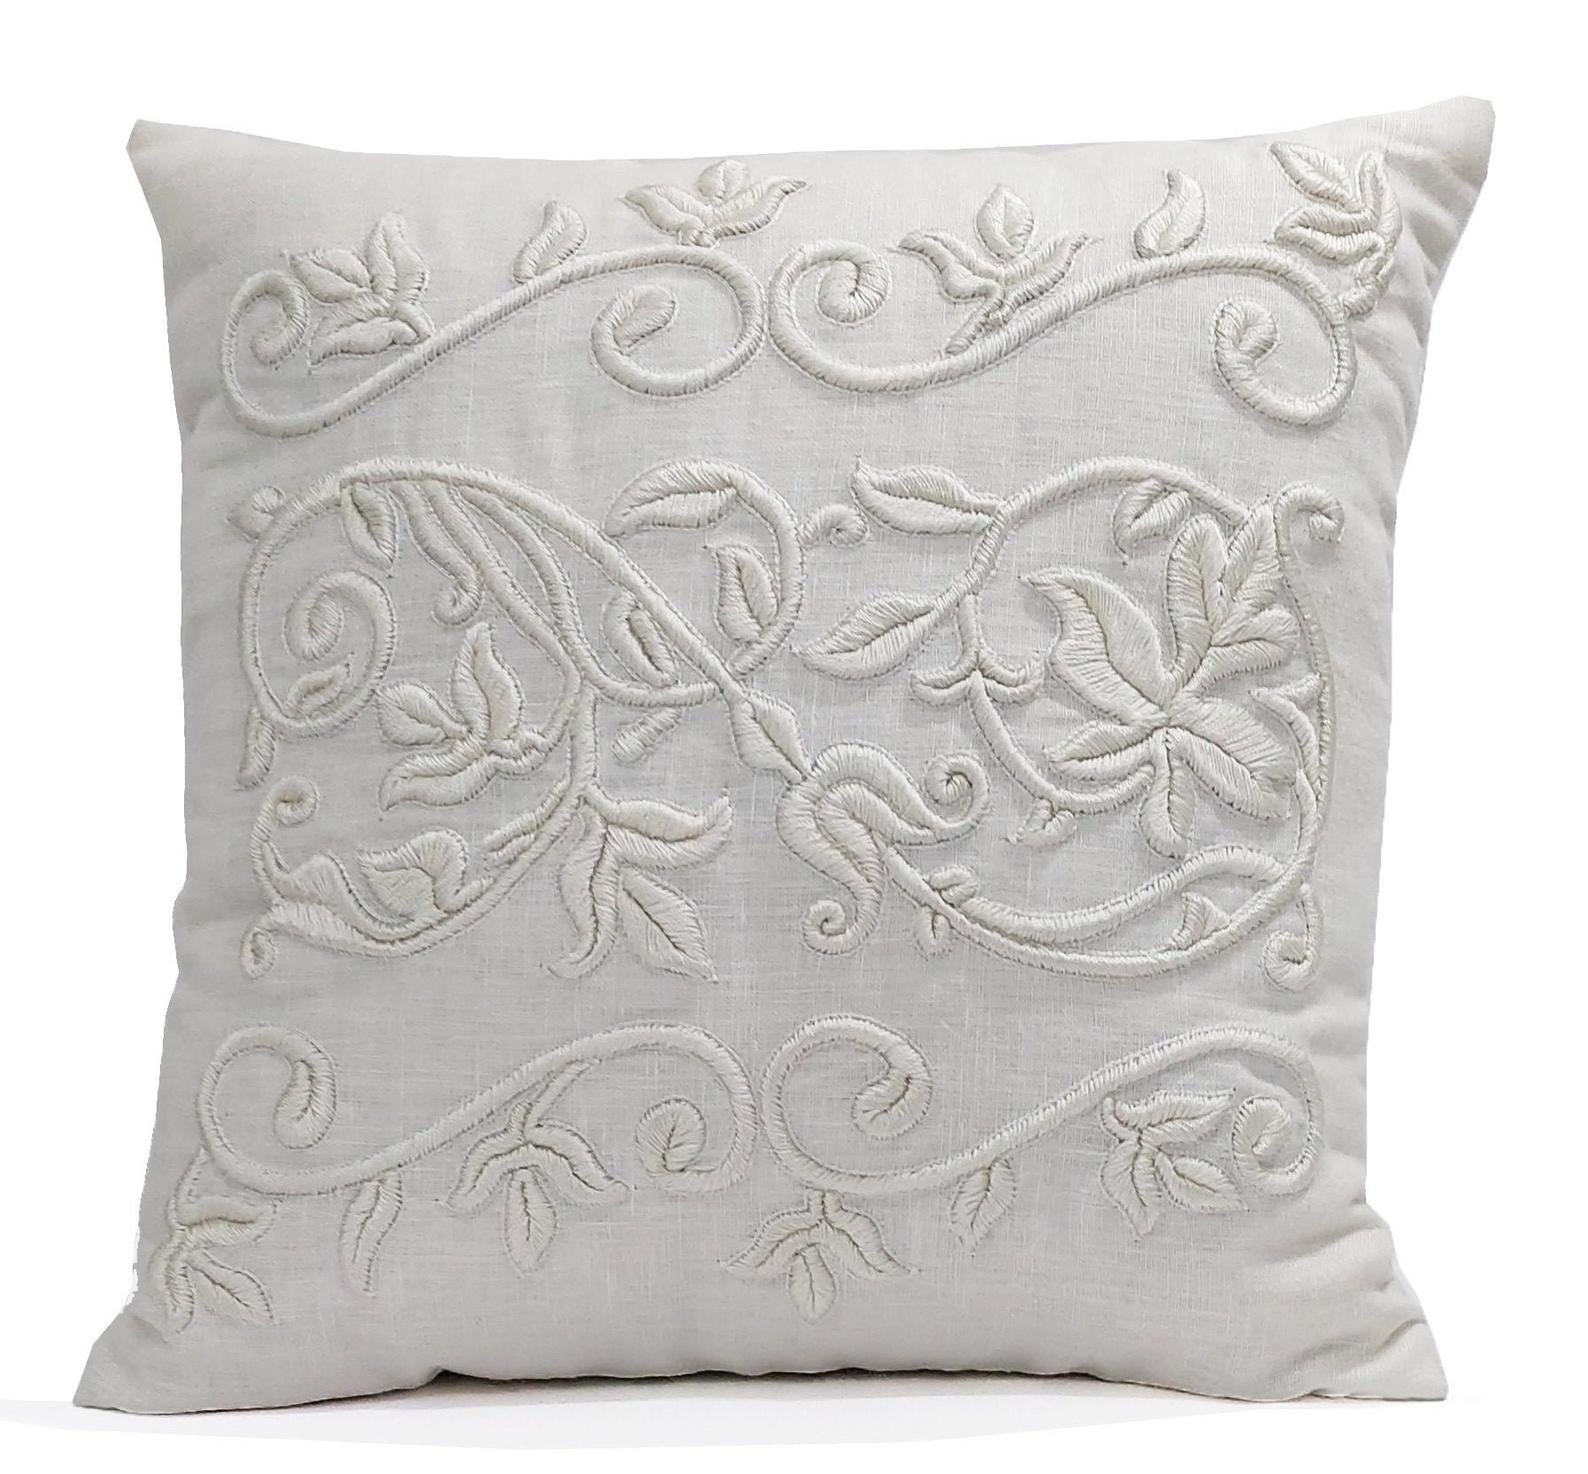 Amore Beaute pillow covers also make a great gift for birthday, wedding, anniversary, housewarming, mother's day.